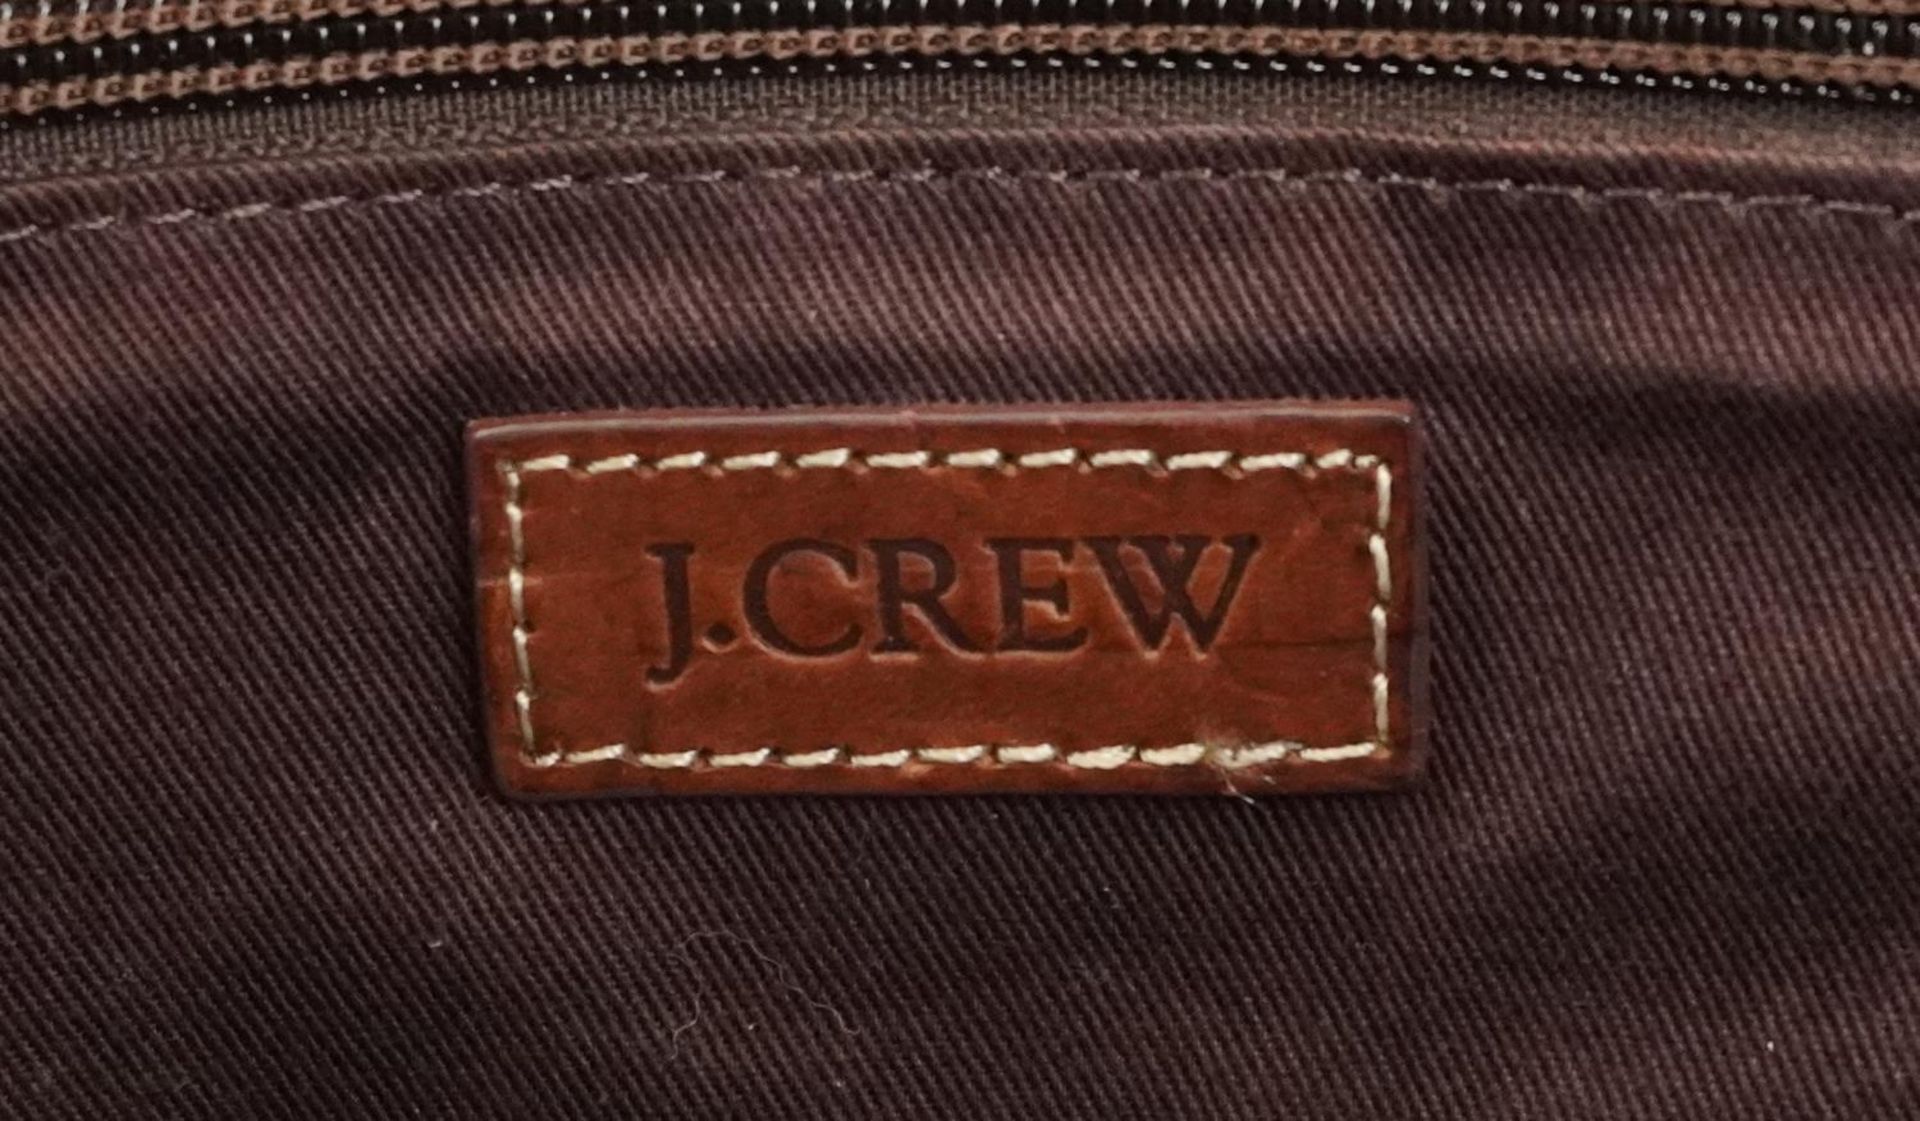 J Crew woollen and leather bag together with a Christian Dior makeup bag, largest 46cm x 36cm : - Bild 4 aus 4